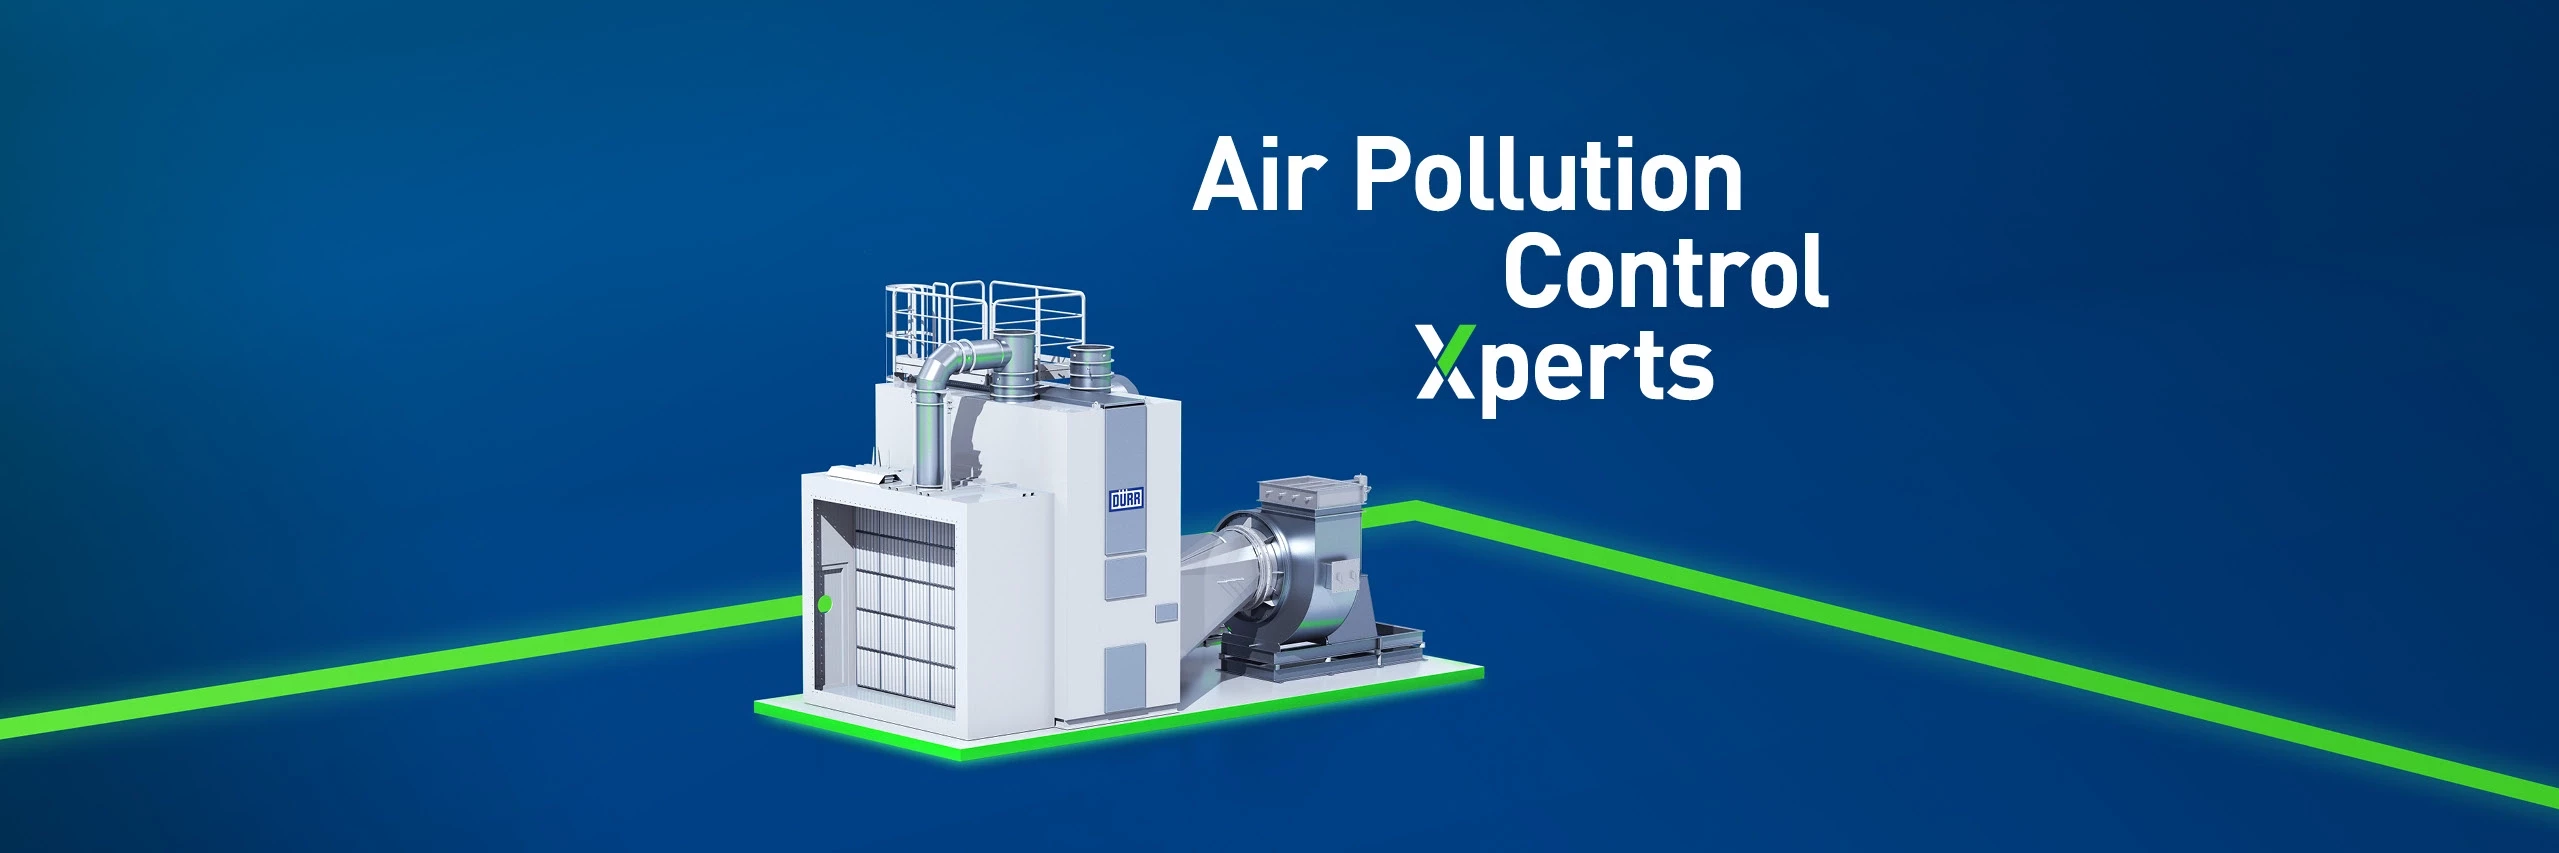 Air Pollution Control Systems and Equipment 